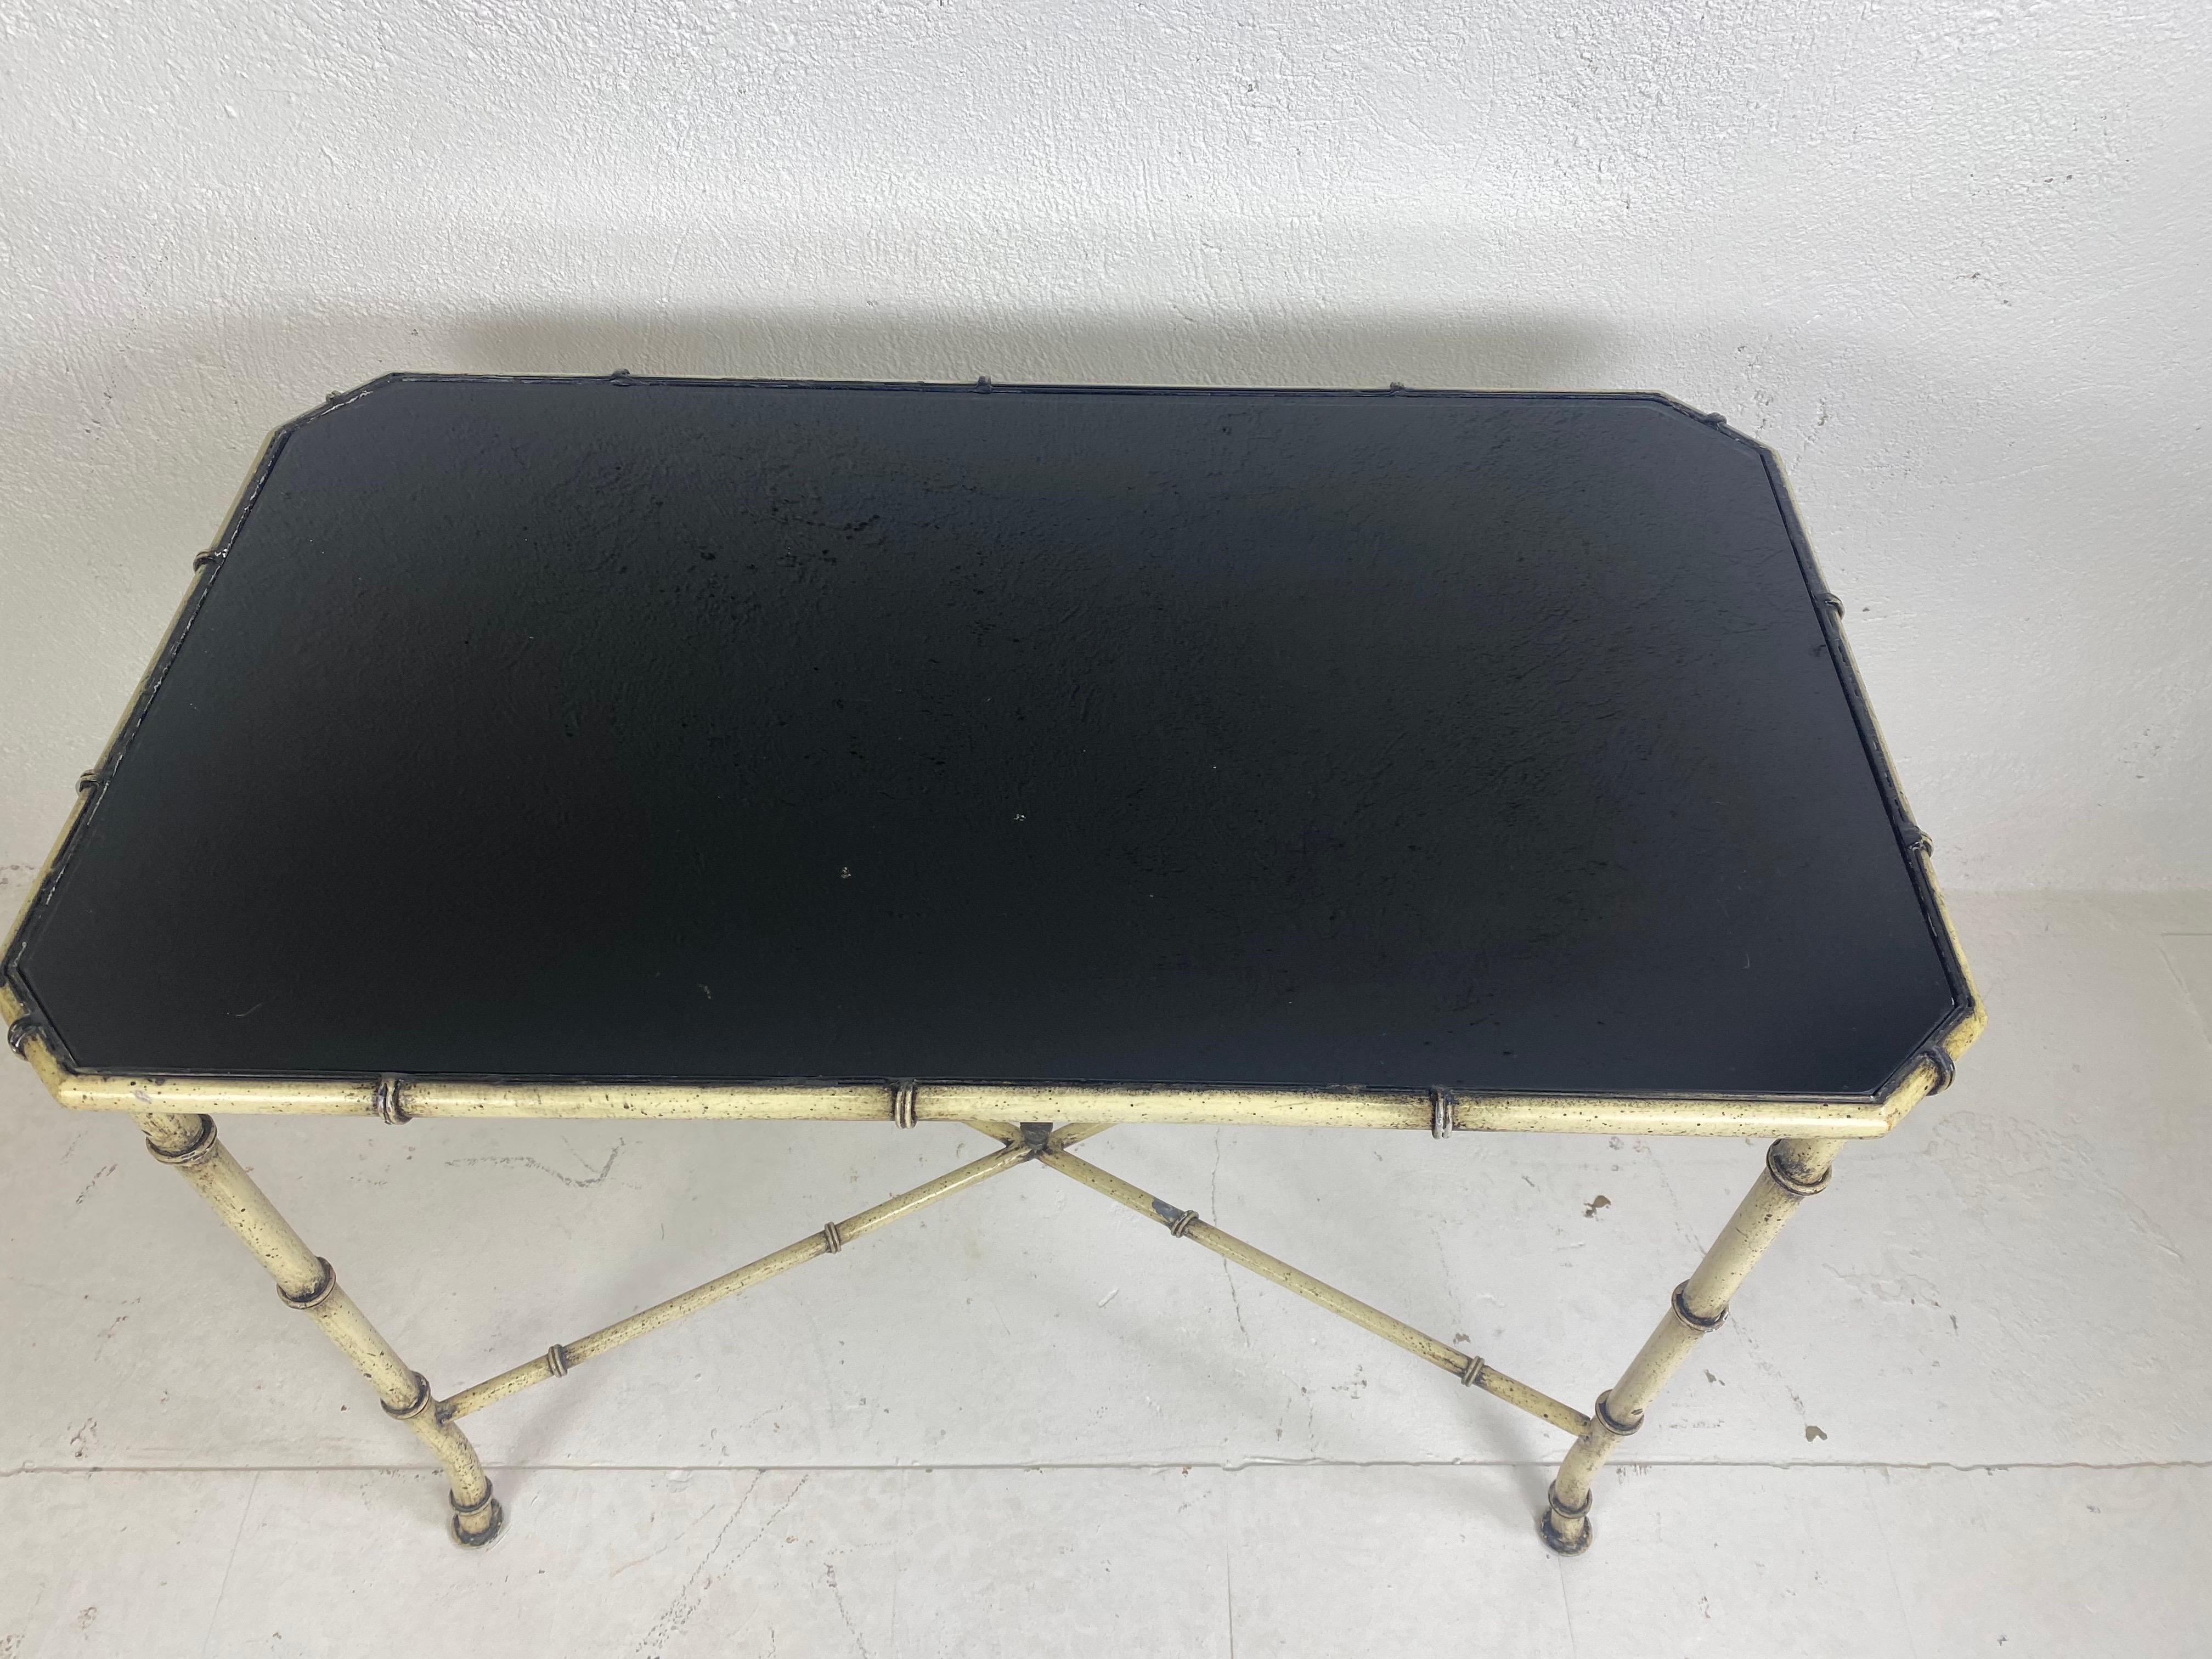 This is a mid-century vintage wrought iron and a black glass faux bamboo side table. The side table has an antique black-and-white finished the surface of the metal with a shiny black glass top this table was American made circa 1960.